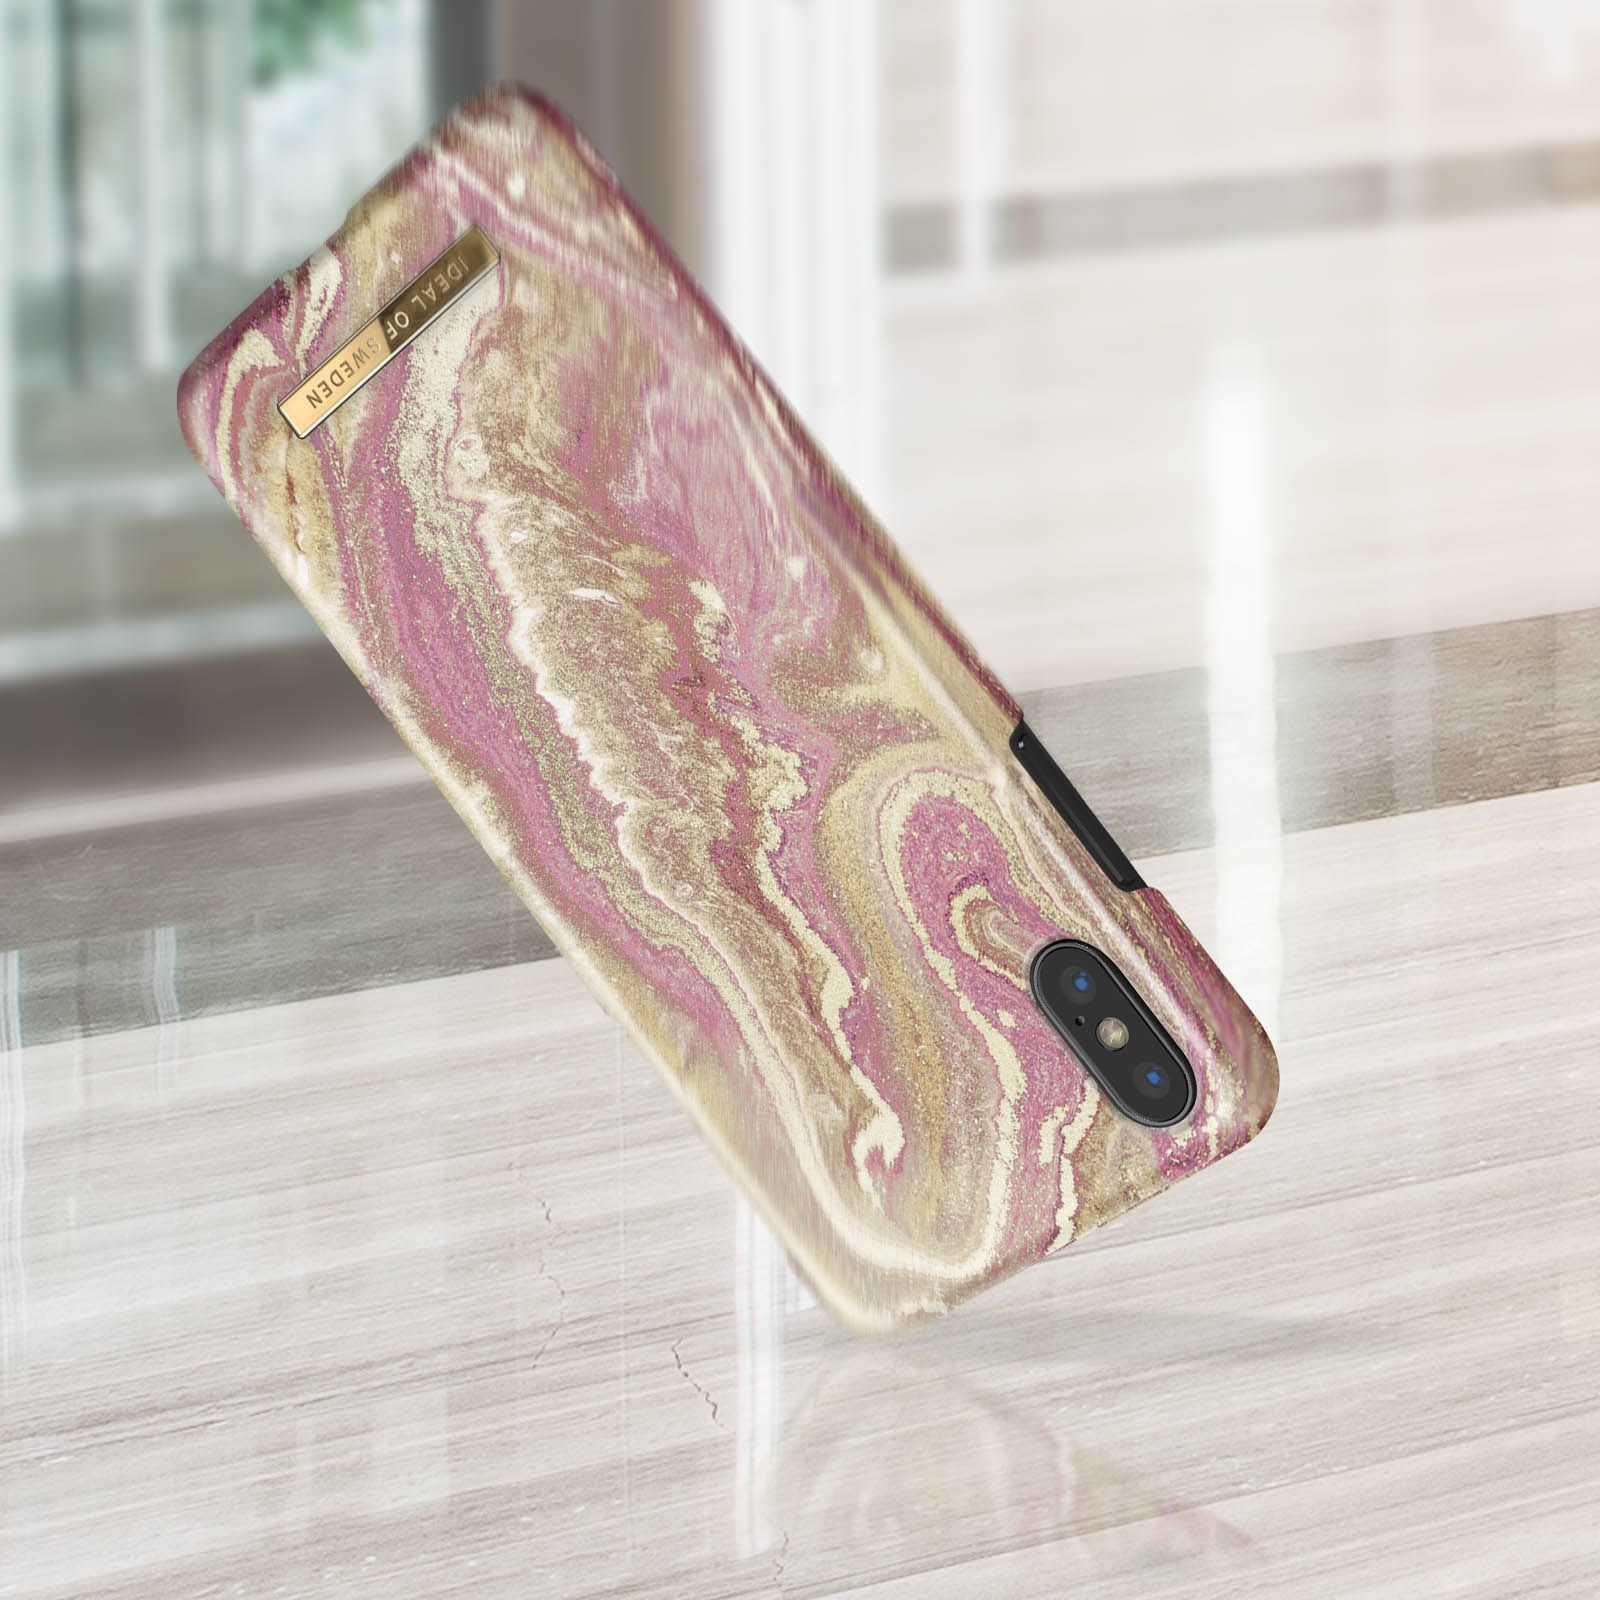 Blush Apple, Marble Backcover, IPhone OF SWEDEN IDFCSS19-IXS-120, IDEAL X/XS, Golden